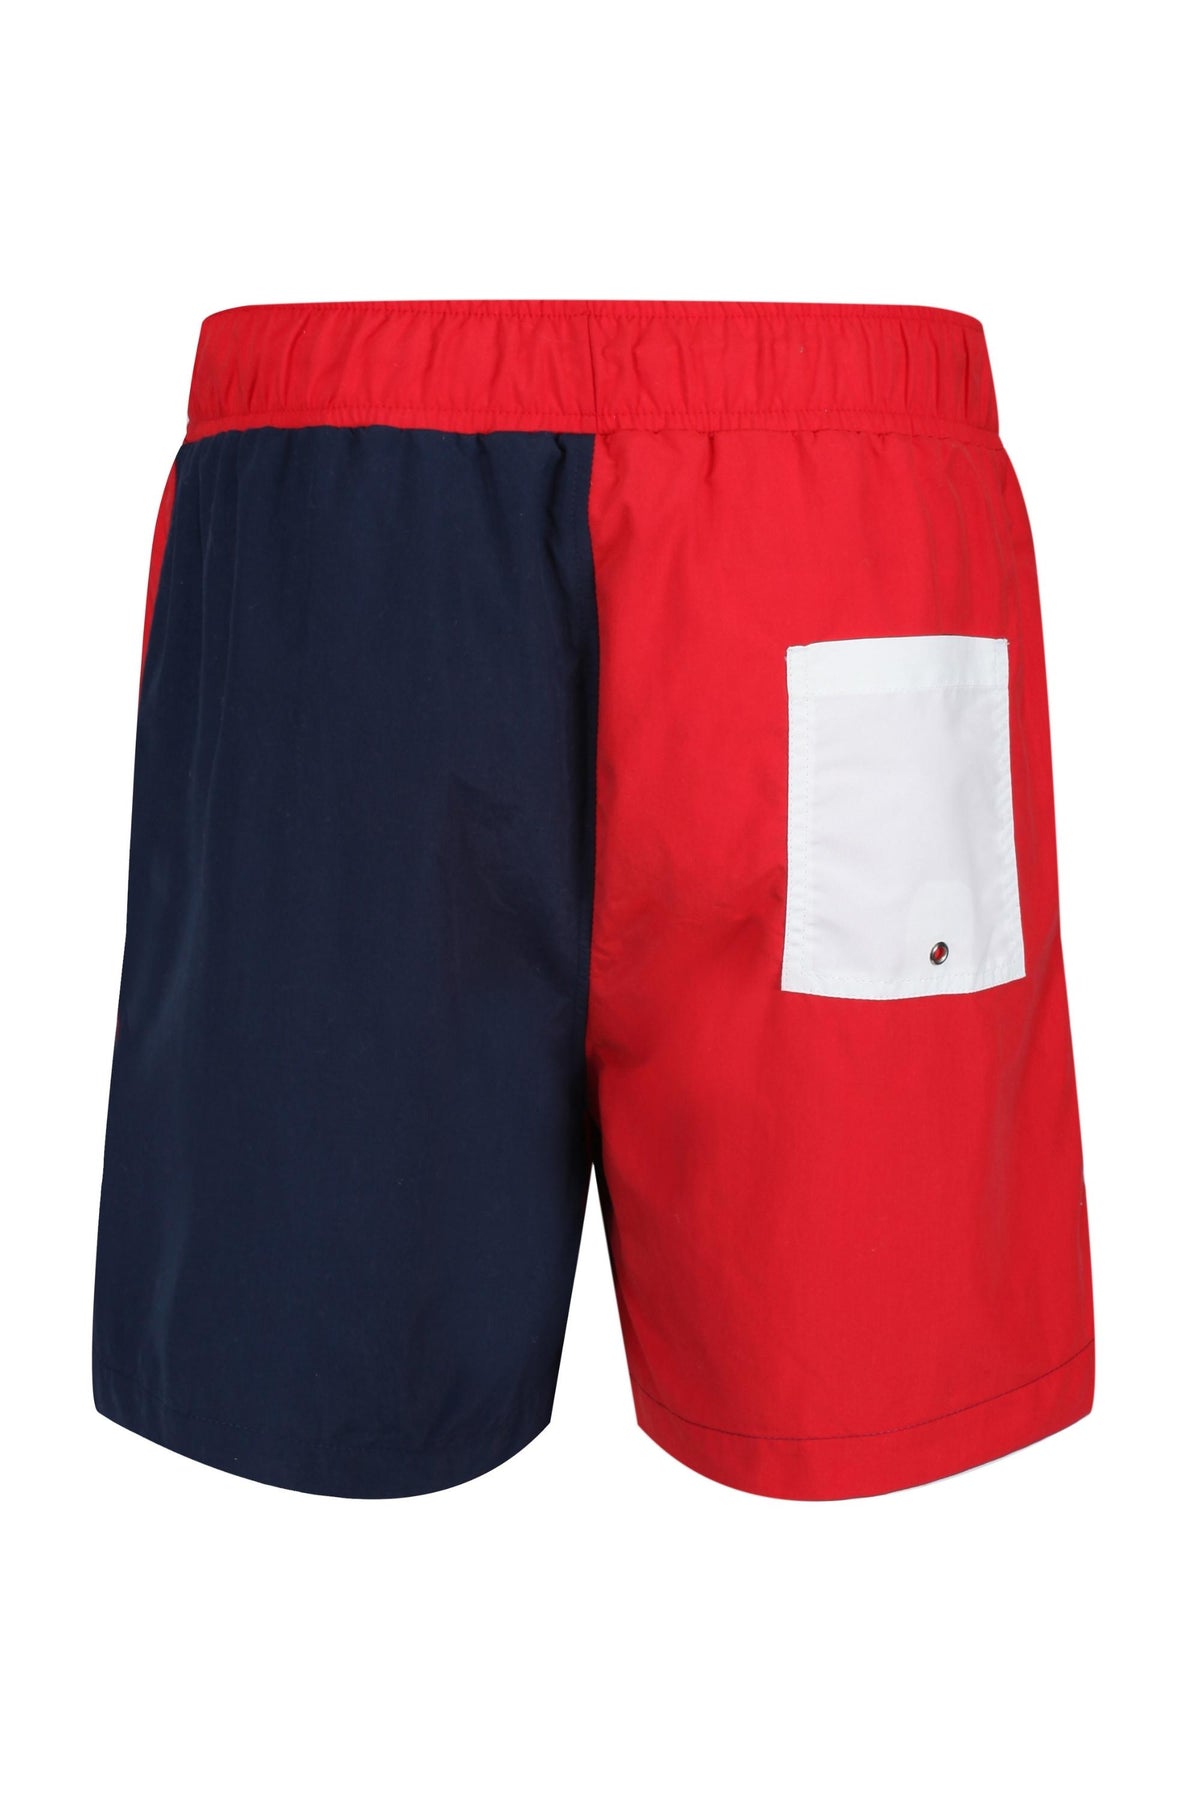 Bordeaux Swim Shorts - Red - Whale Of A Time Clothing